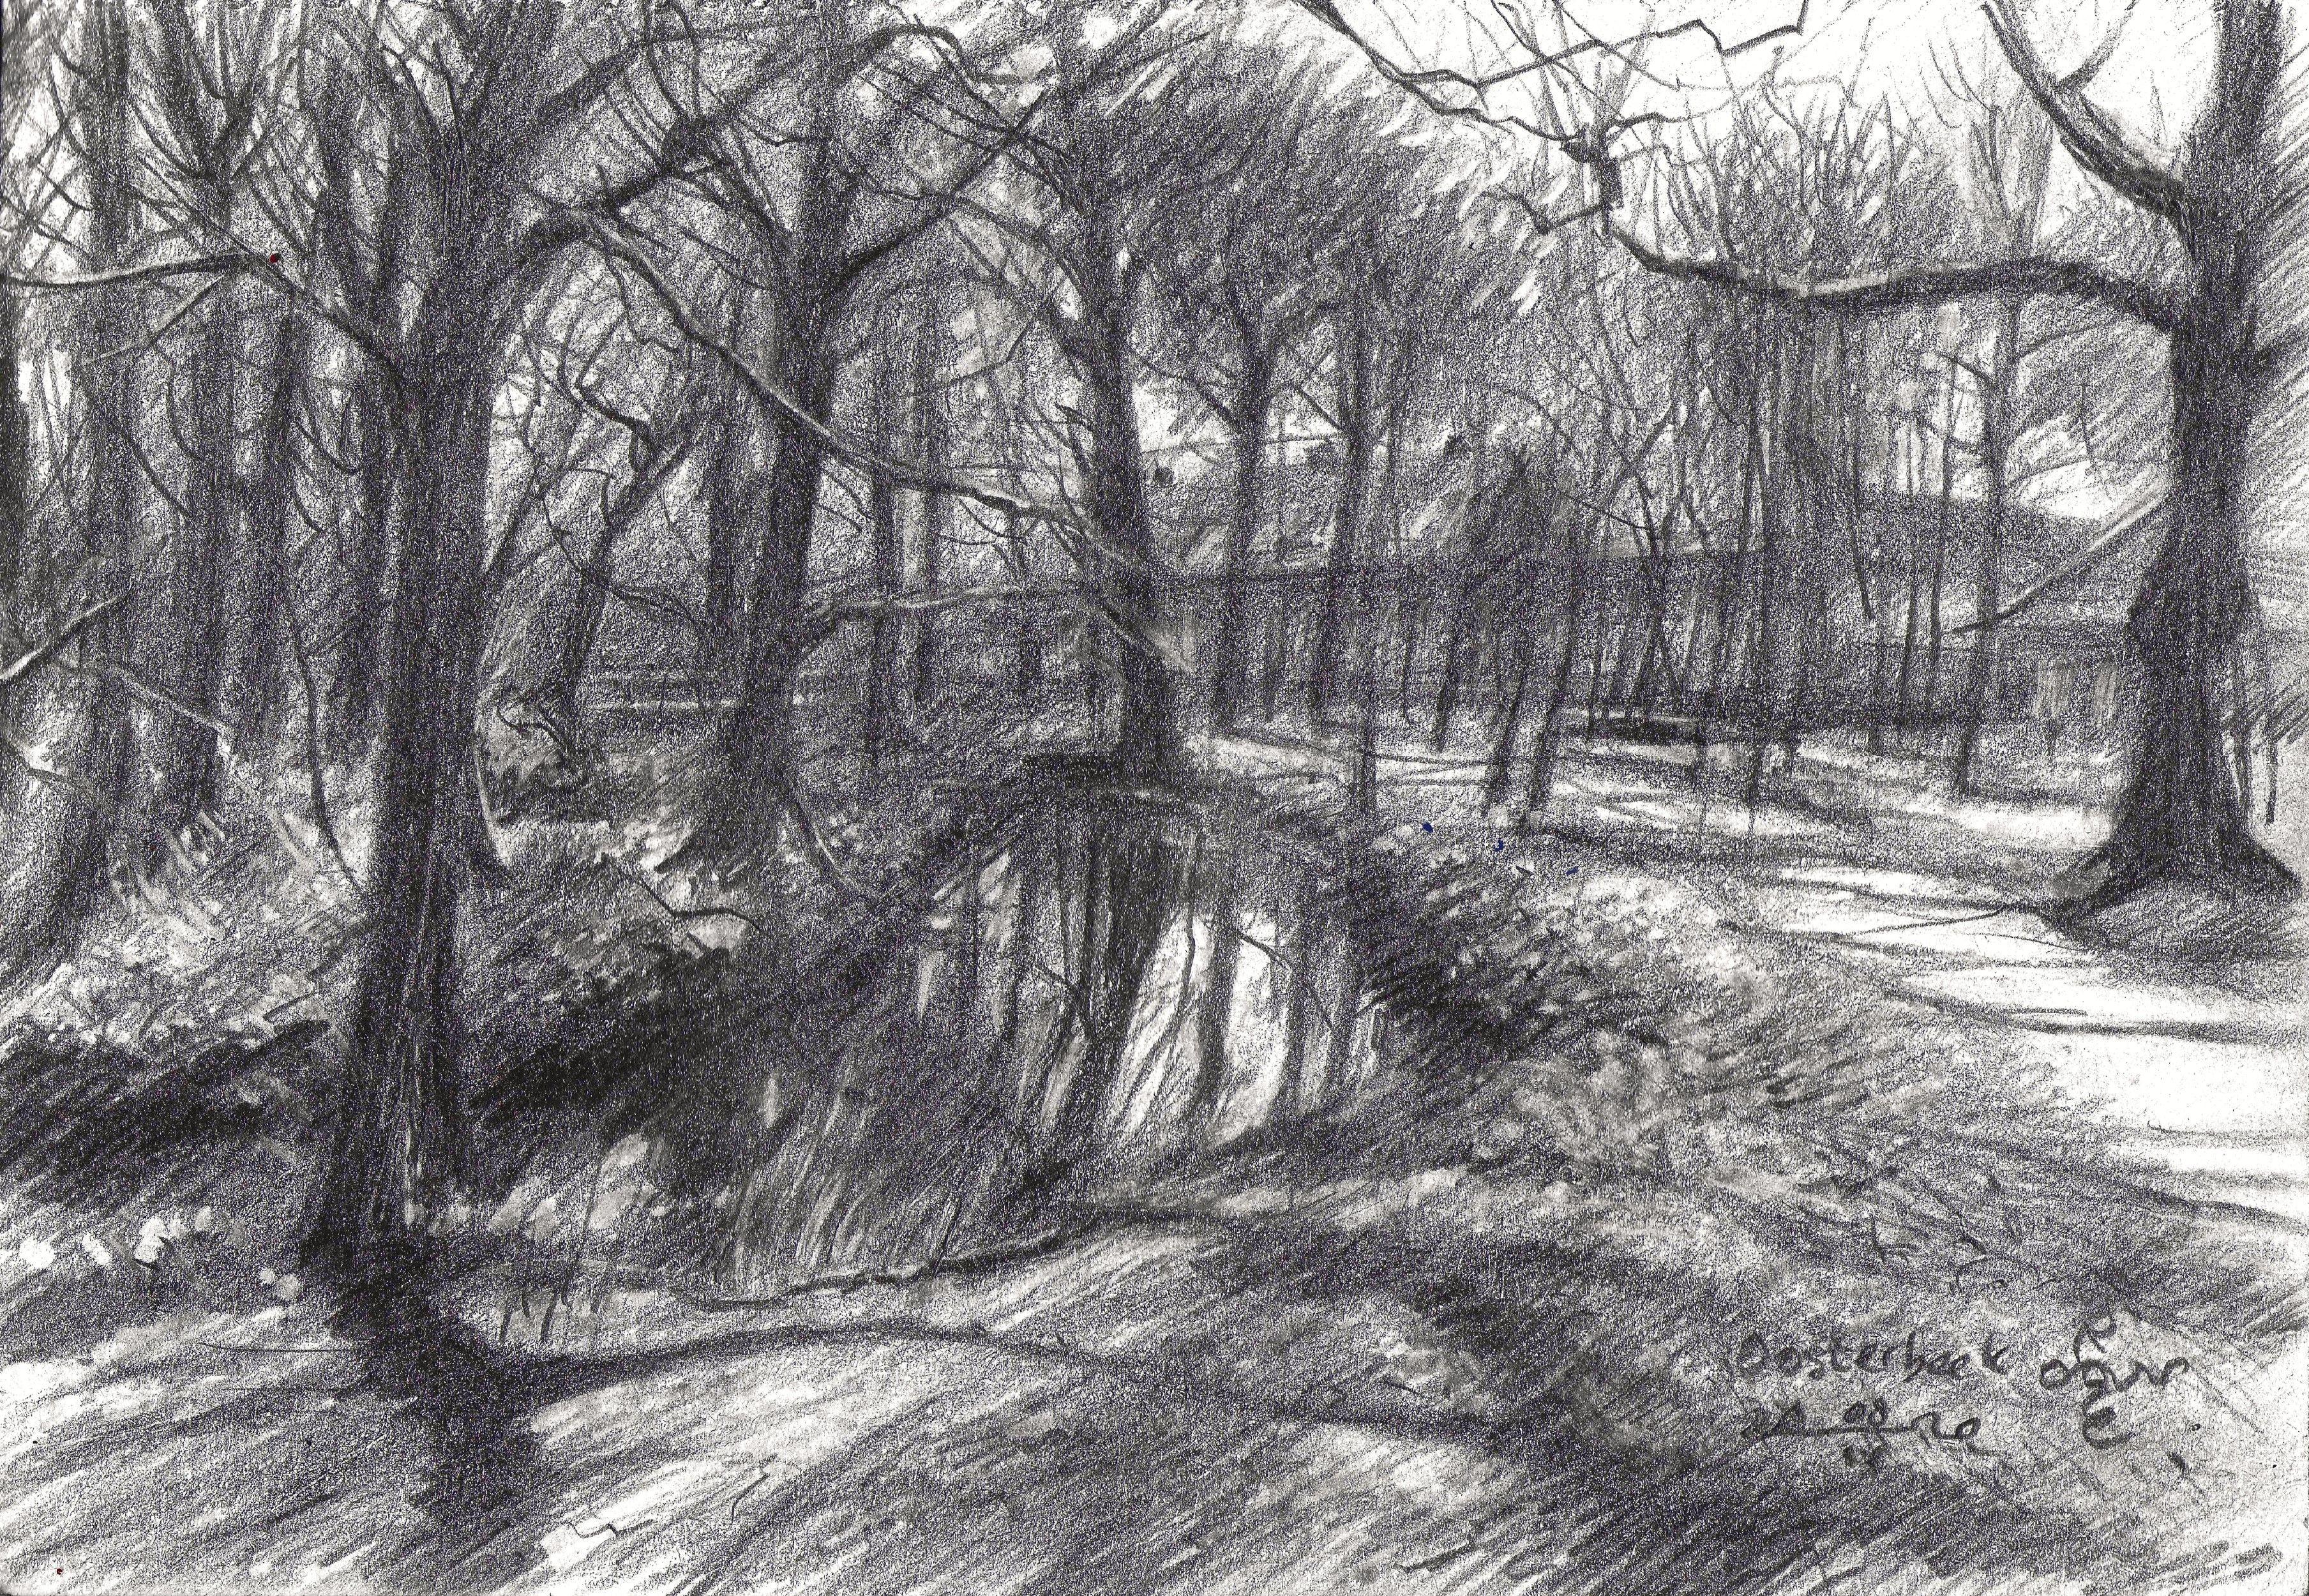 Oosterbeek - 07-04-20, Drawing, Pencil/Colored Pencil on Paper - Art by Corne Akkers